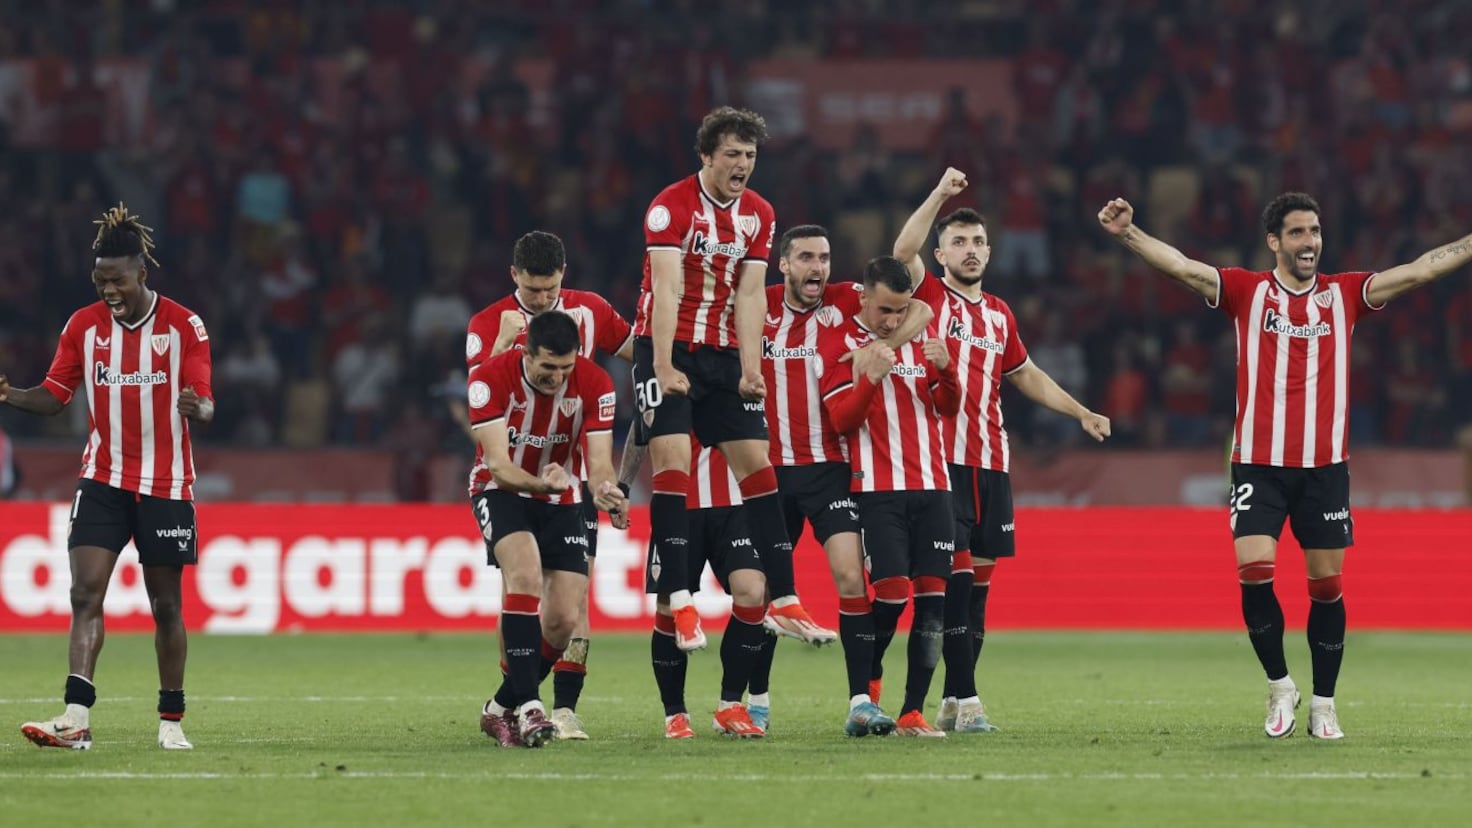 Athletic Bilbao's 40-Year Wait Ends with Epic Shootout Win!